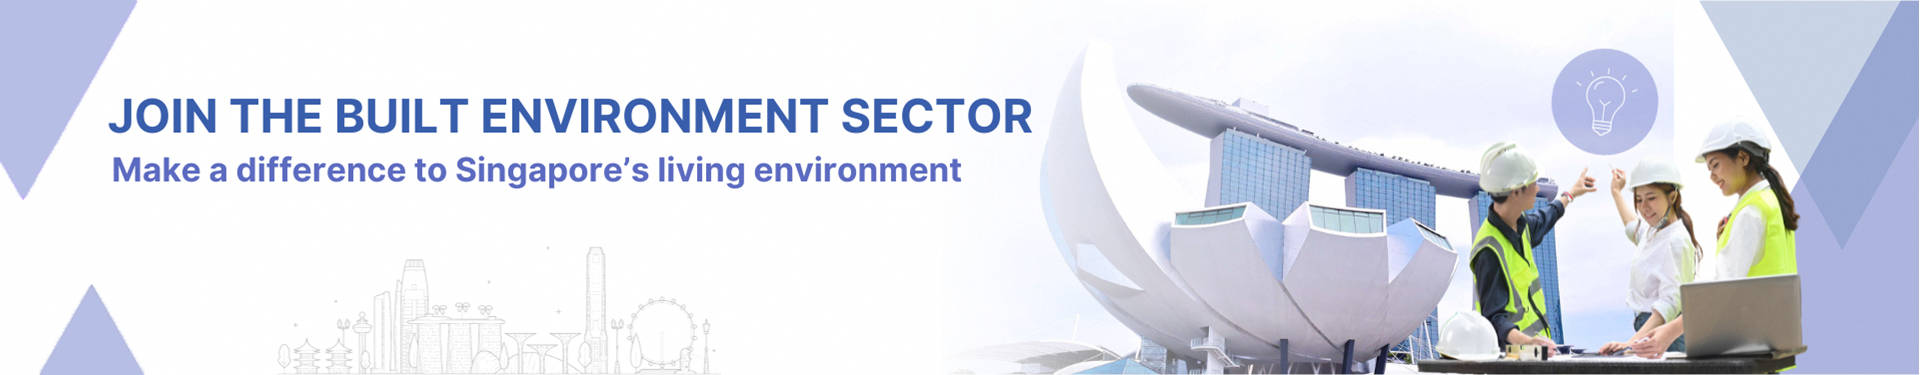 JOIN THE BUILT ENVIRONMENT SECTOR